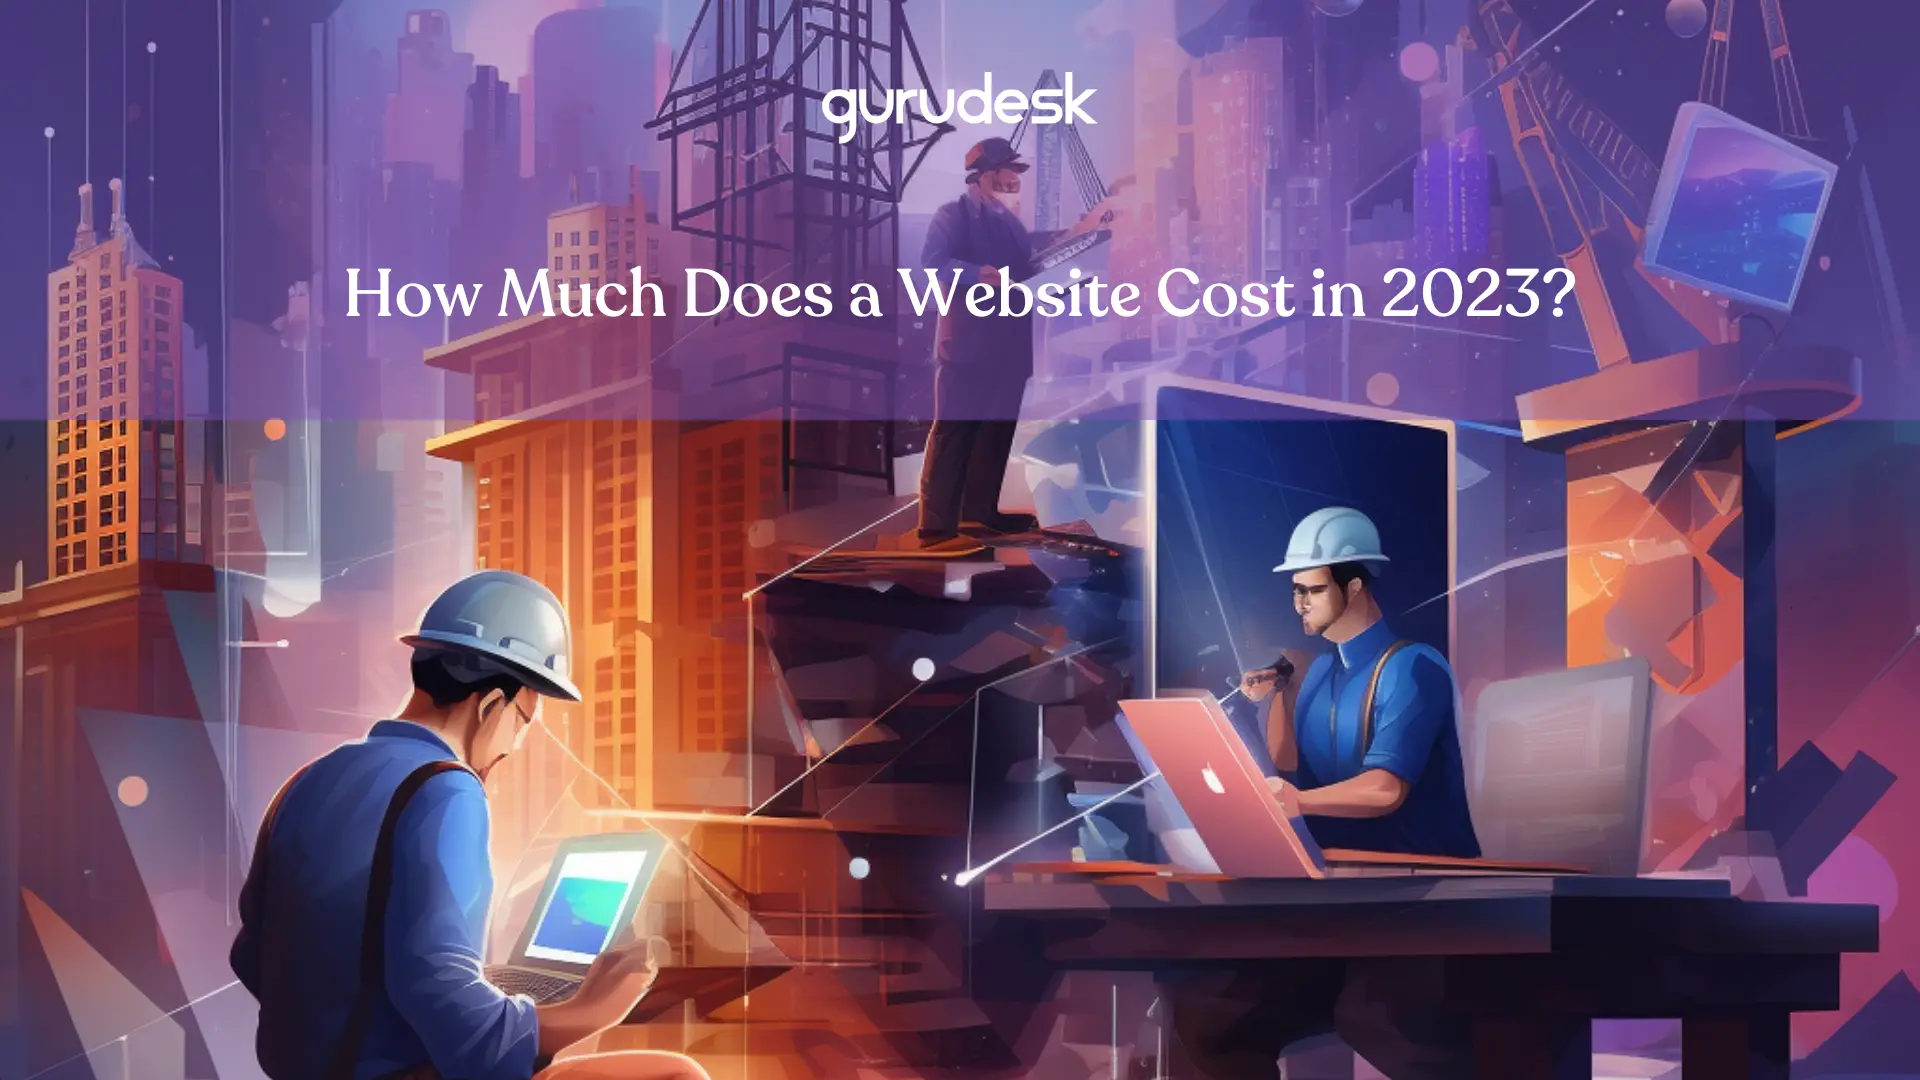 how much does a website cost how much does a website cost a year how much does a website cost a month, how much does a website build cost how much does it cost to create a website how much should a website cost for a small business how much does a website cost in 2023